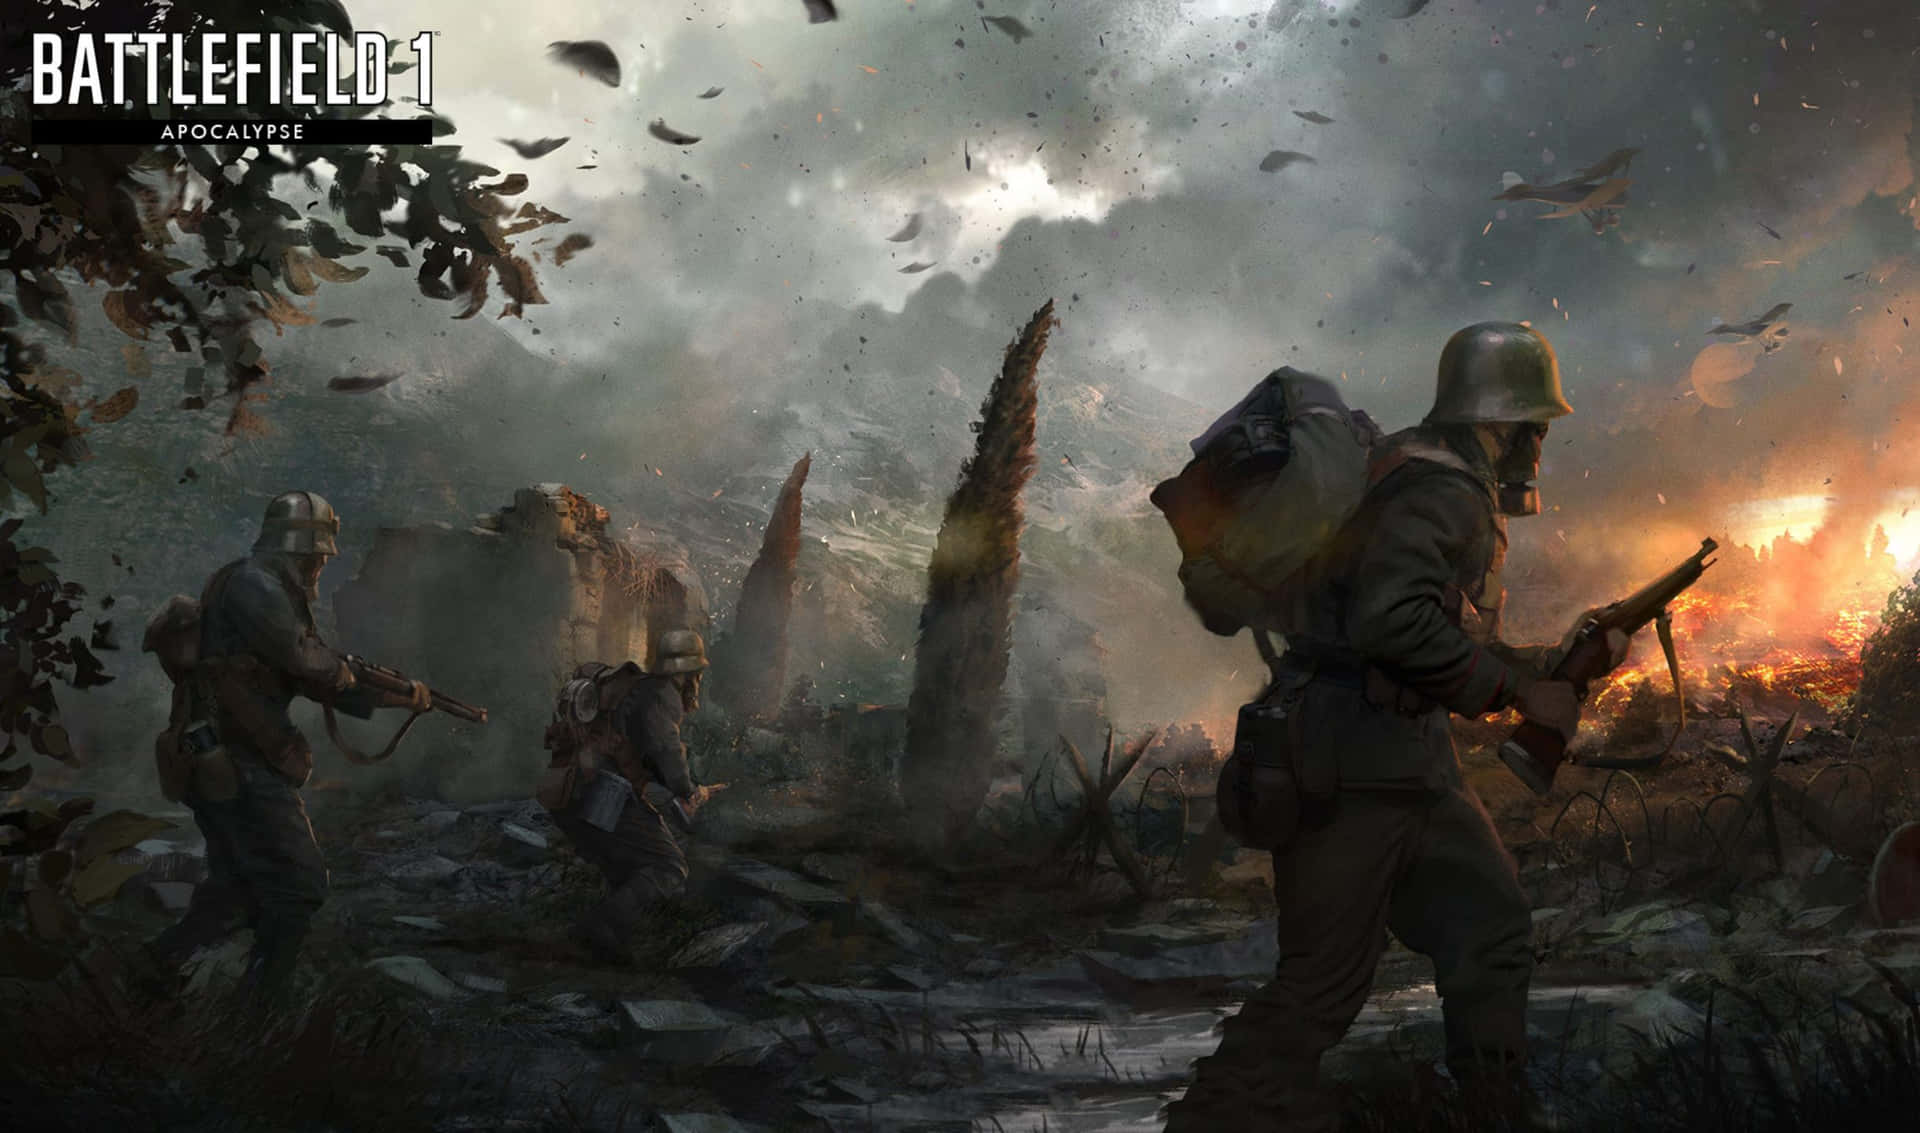 Play the newest installment of the Battlefield series with 2440x1440 resolution.